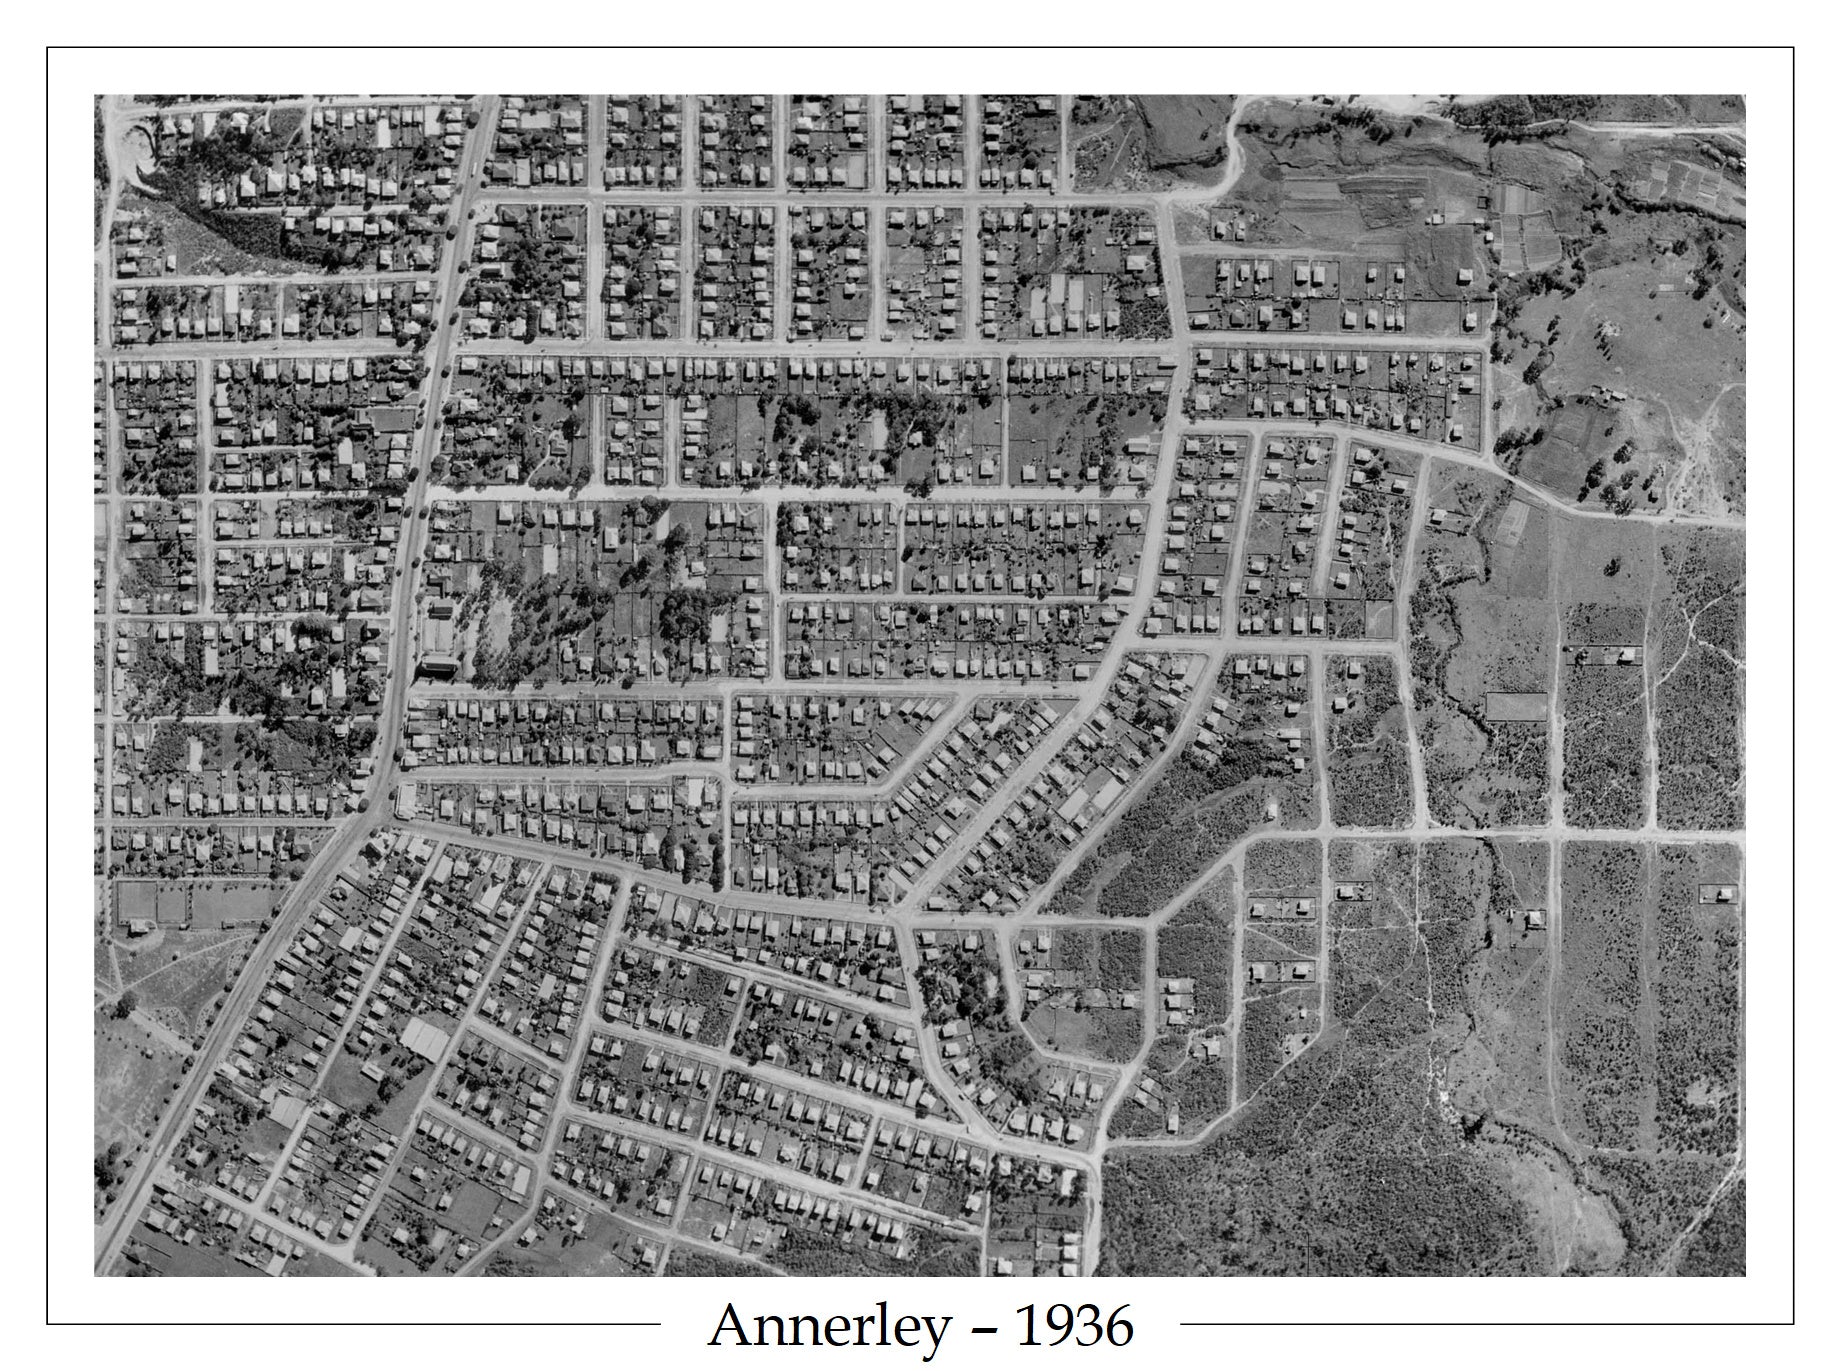 1936 Annerley - Aerial Photo - Cracknell Road